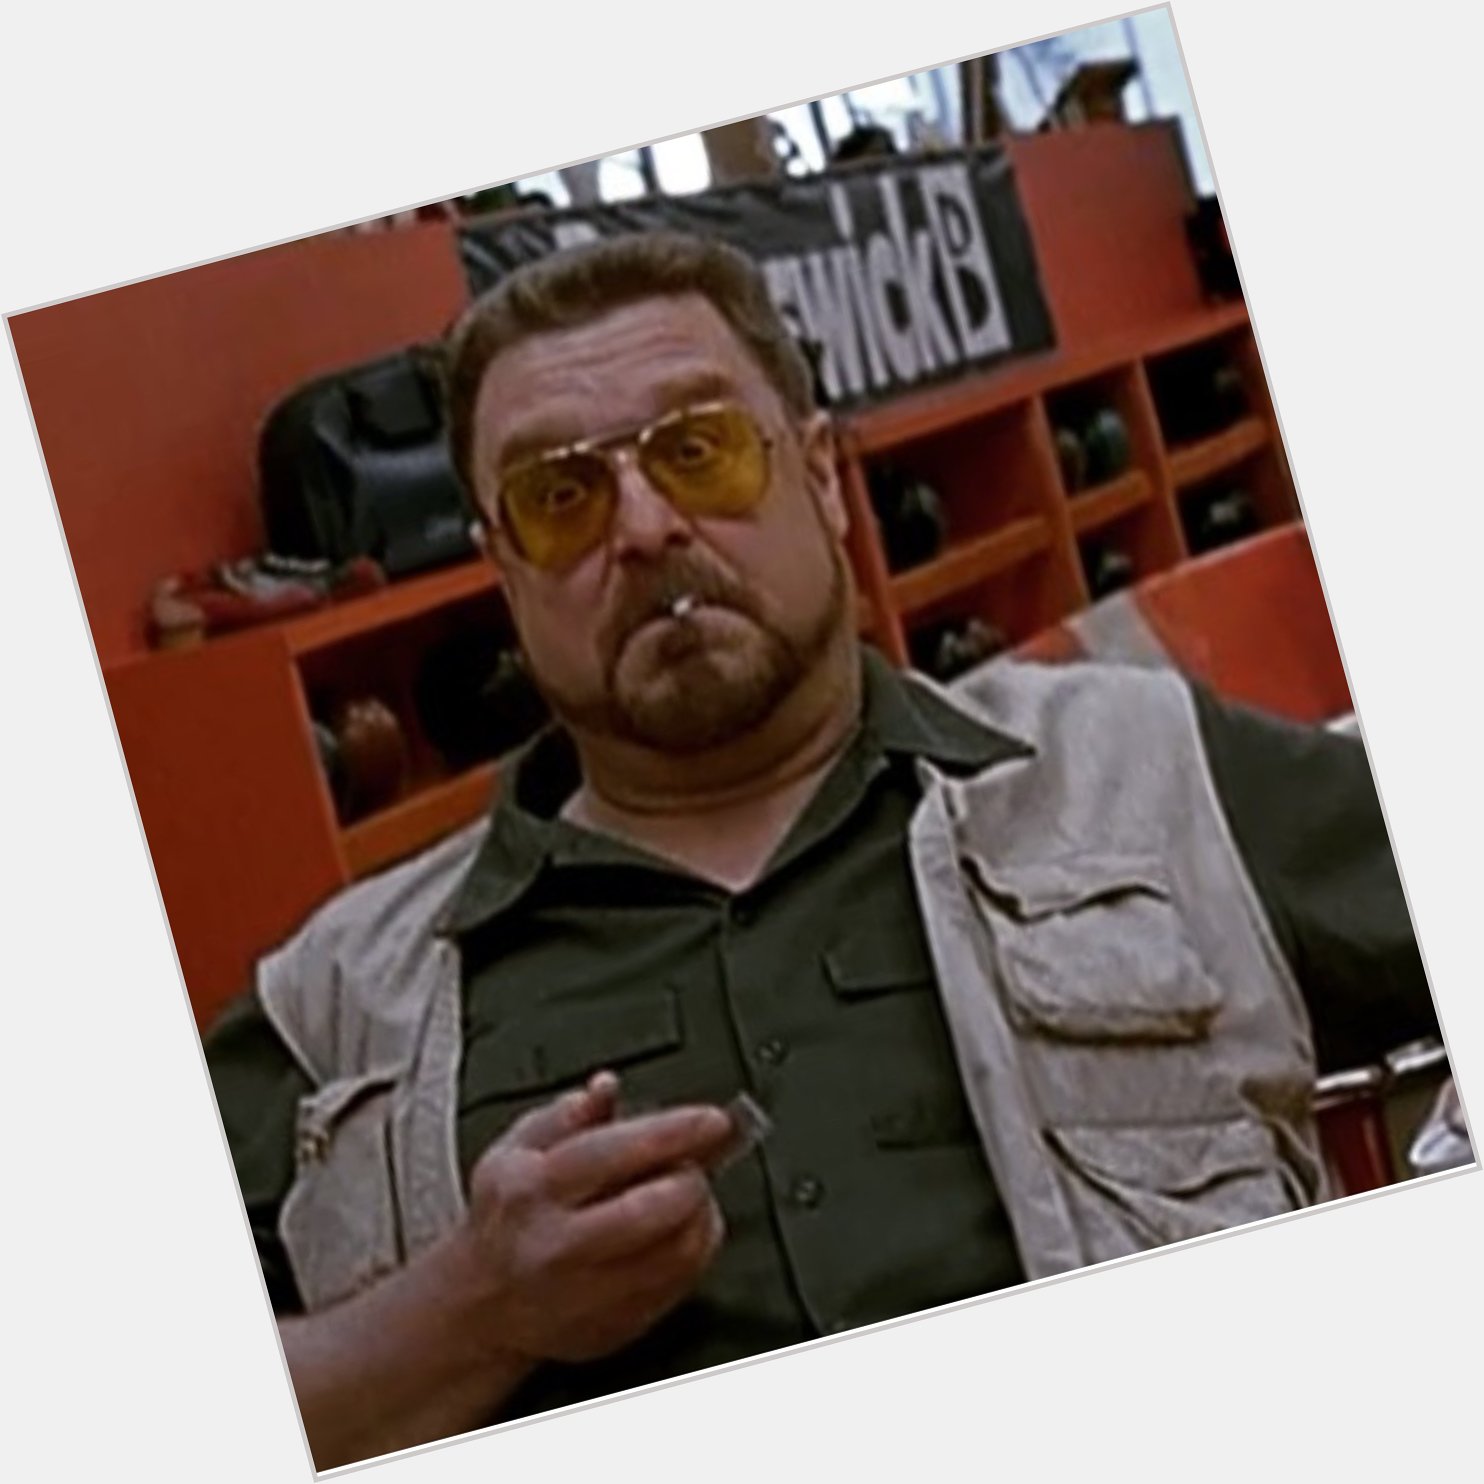 Happy Birthday, John Goodman! Your role really made the movie, did it not?  